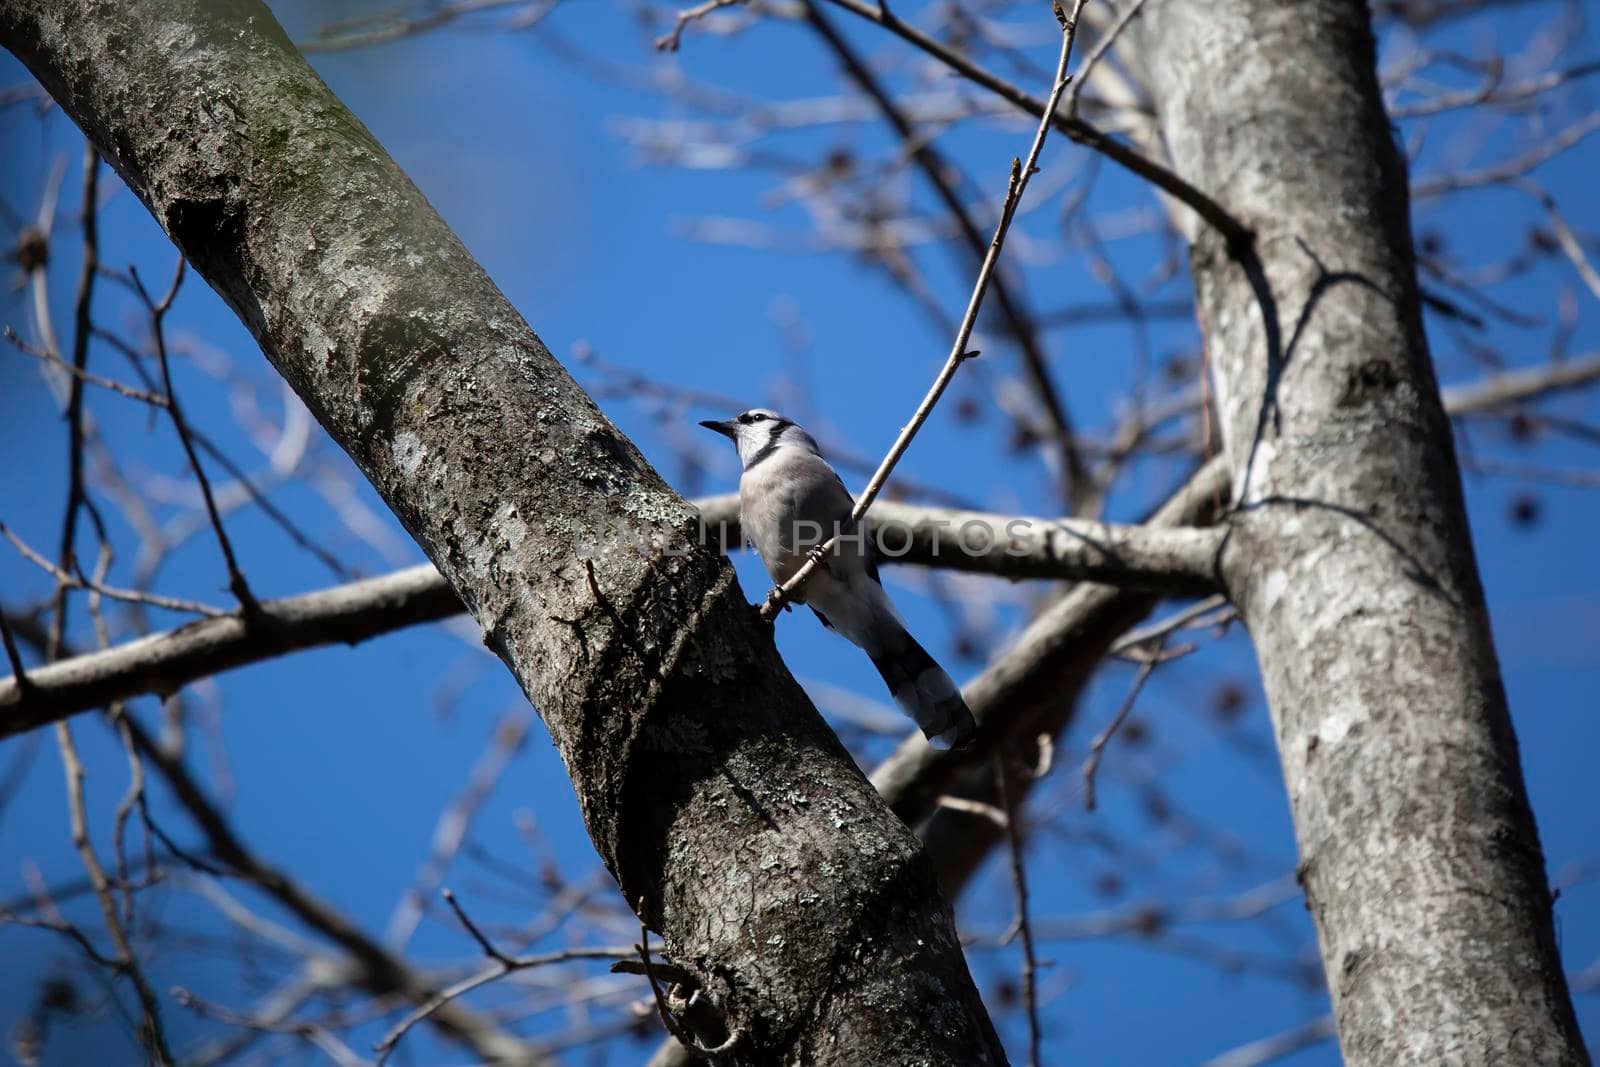 Majestic blue jay (Cyanocitta cristata) looking out cautiously from its perch on a tree